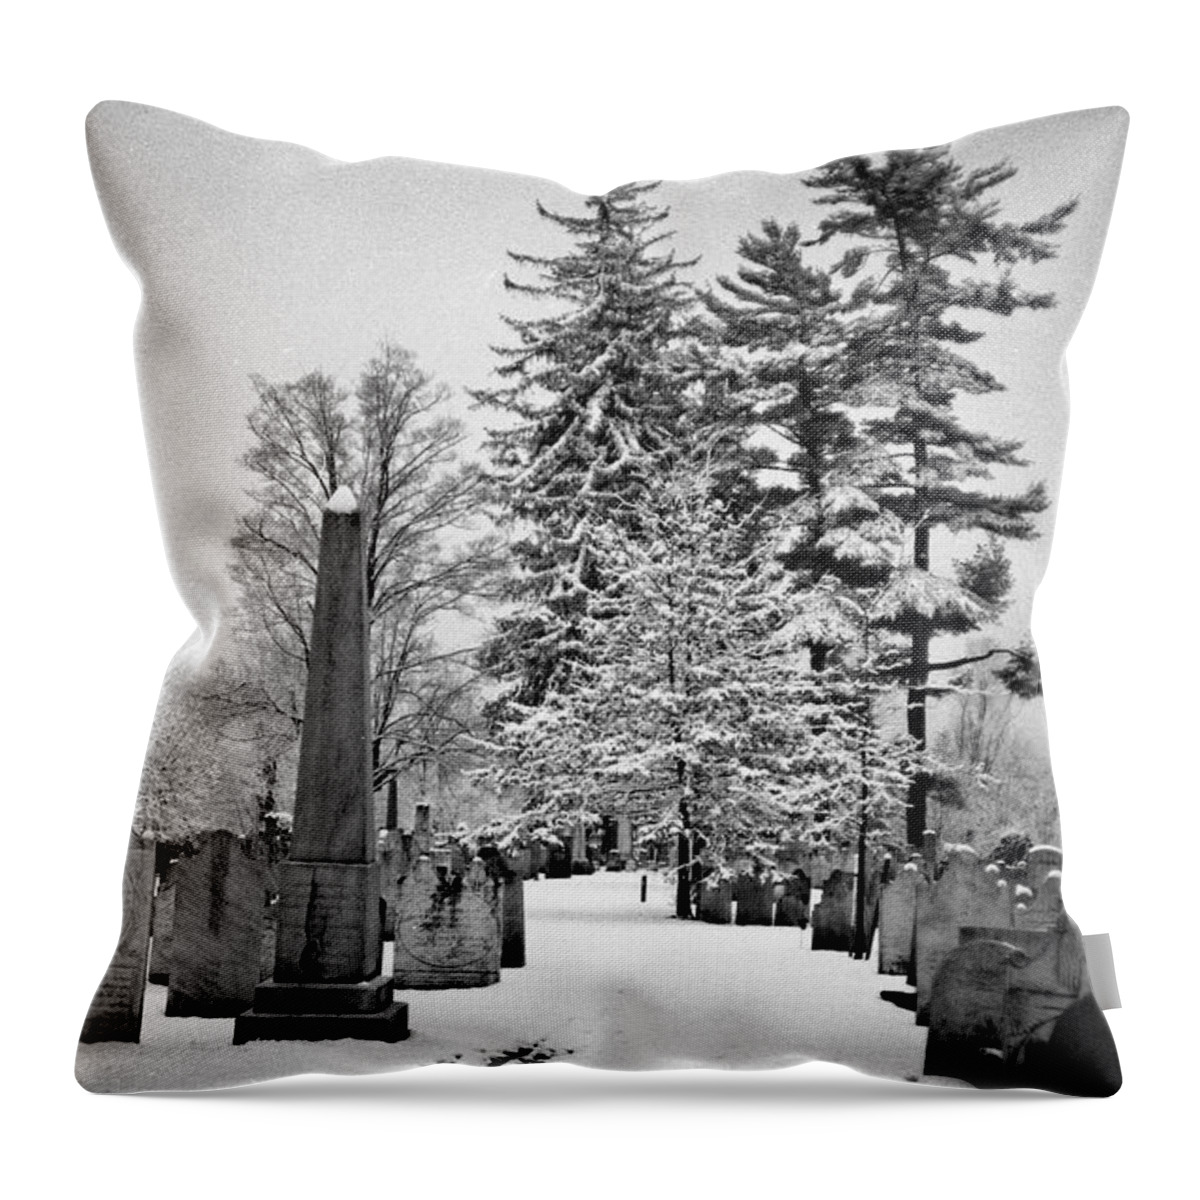 Cemeteries Throw Pillow featuring the photograph Old First Church Cemetery by John Schneider